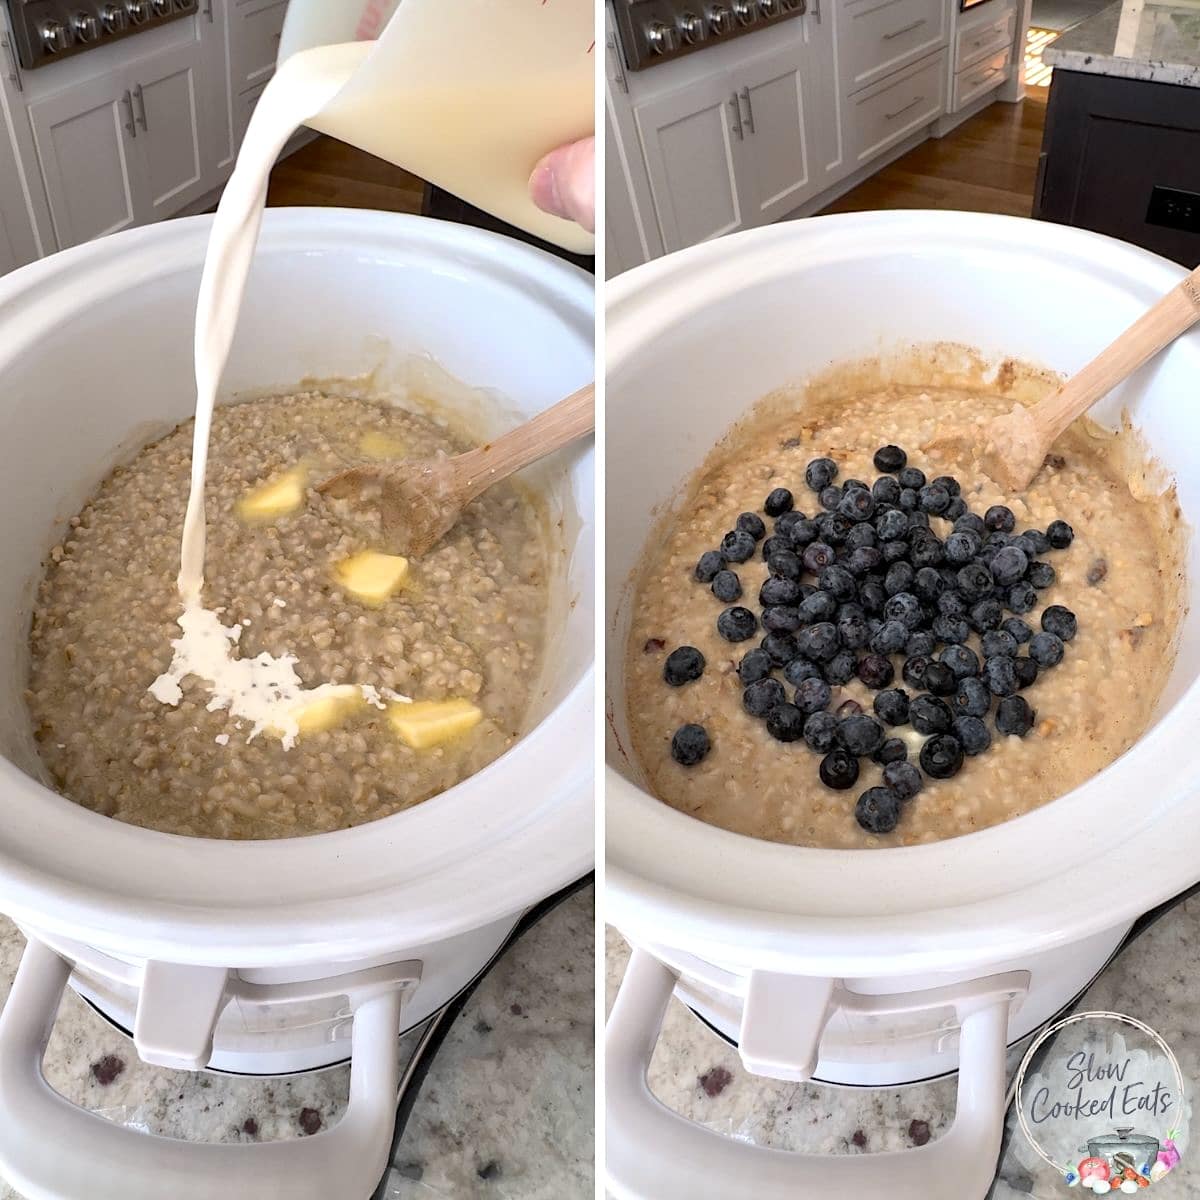 Adding the blueberries butter cream and sugar to the cooked slow cooker steel cut oats.